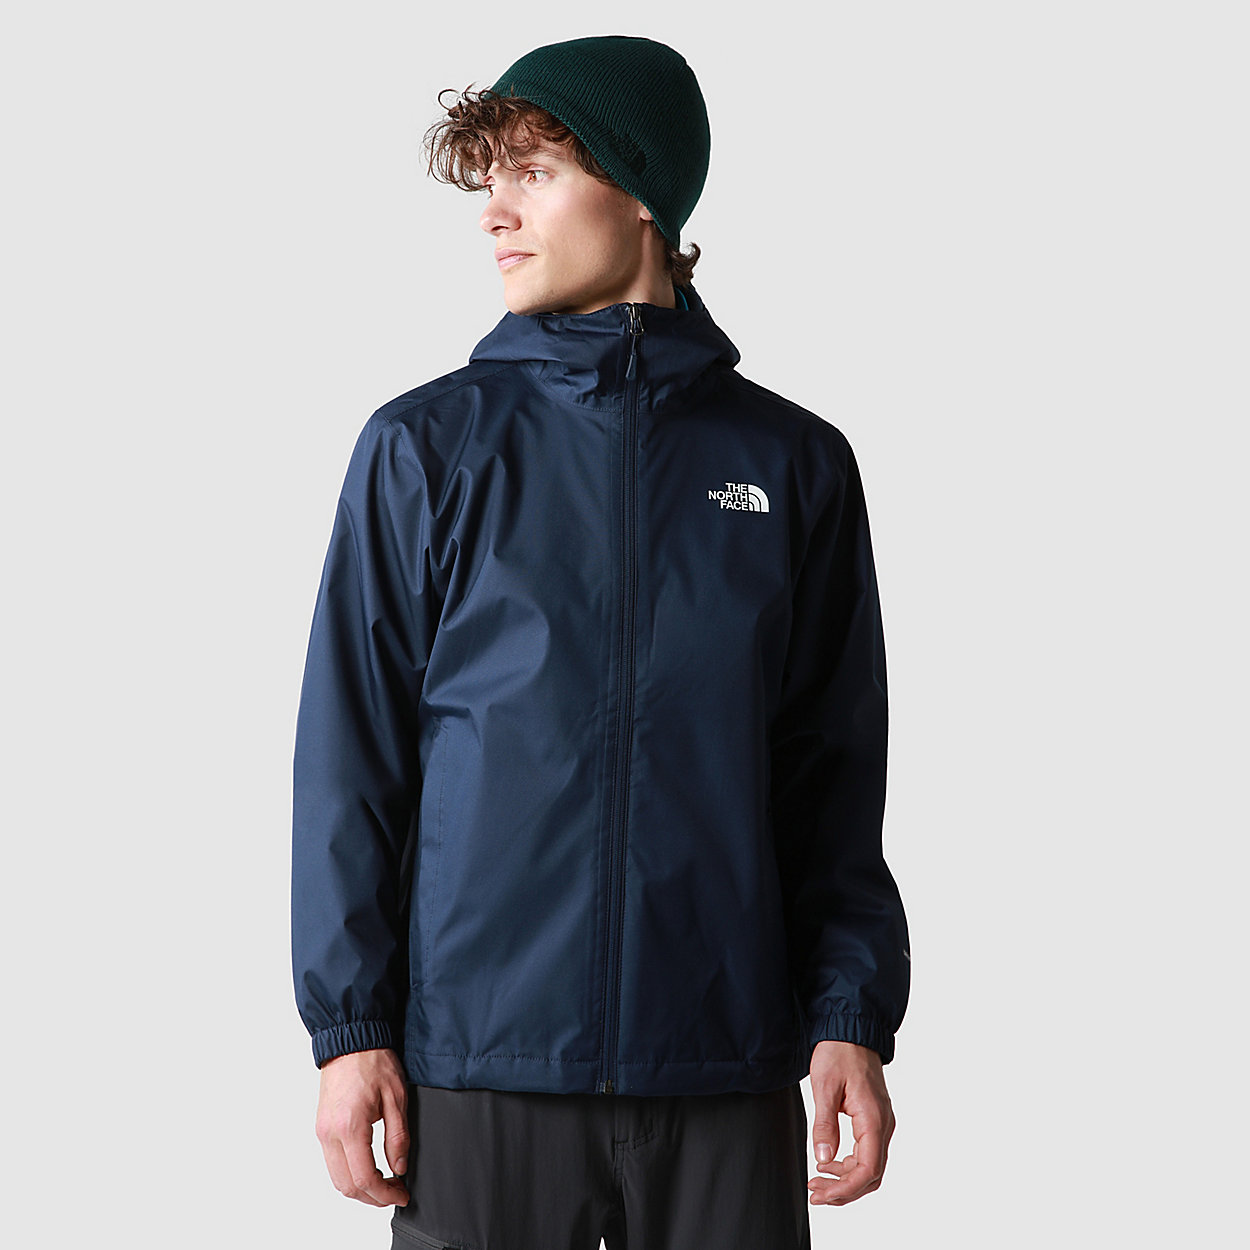 Unlock Wilderness' choice in the Mountain Equipment Vs North Face comparison, the Quest Hooded Jacket by The North Face